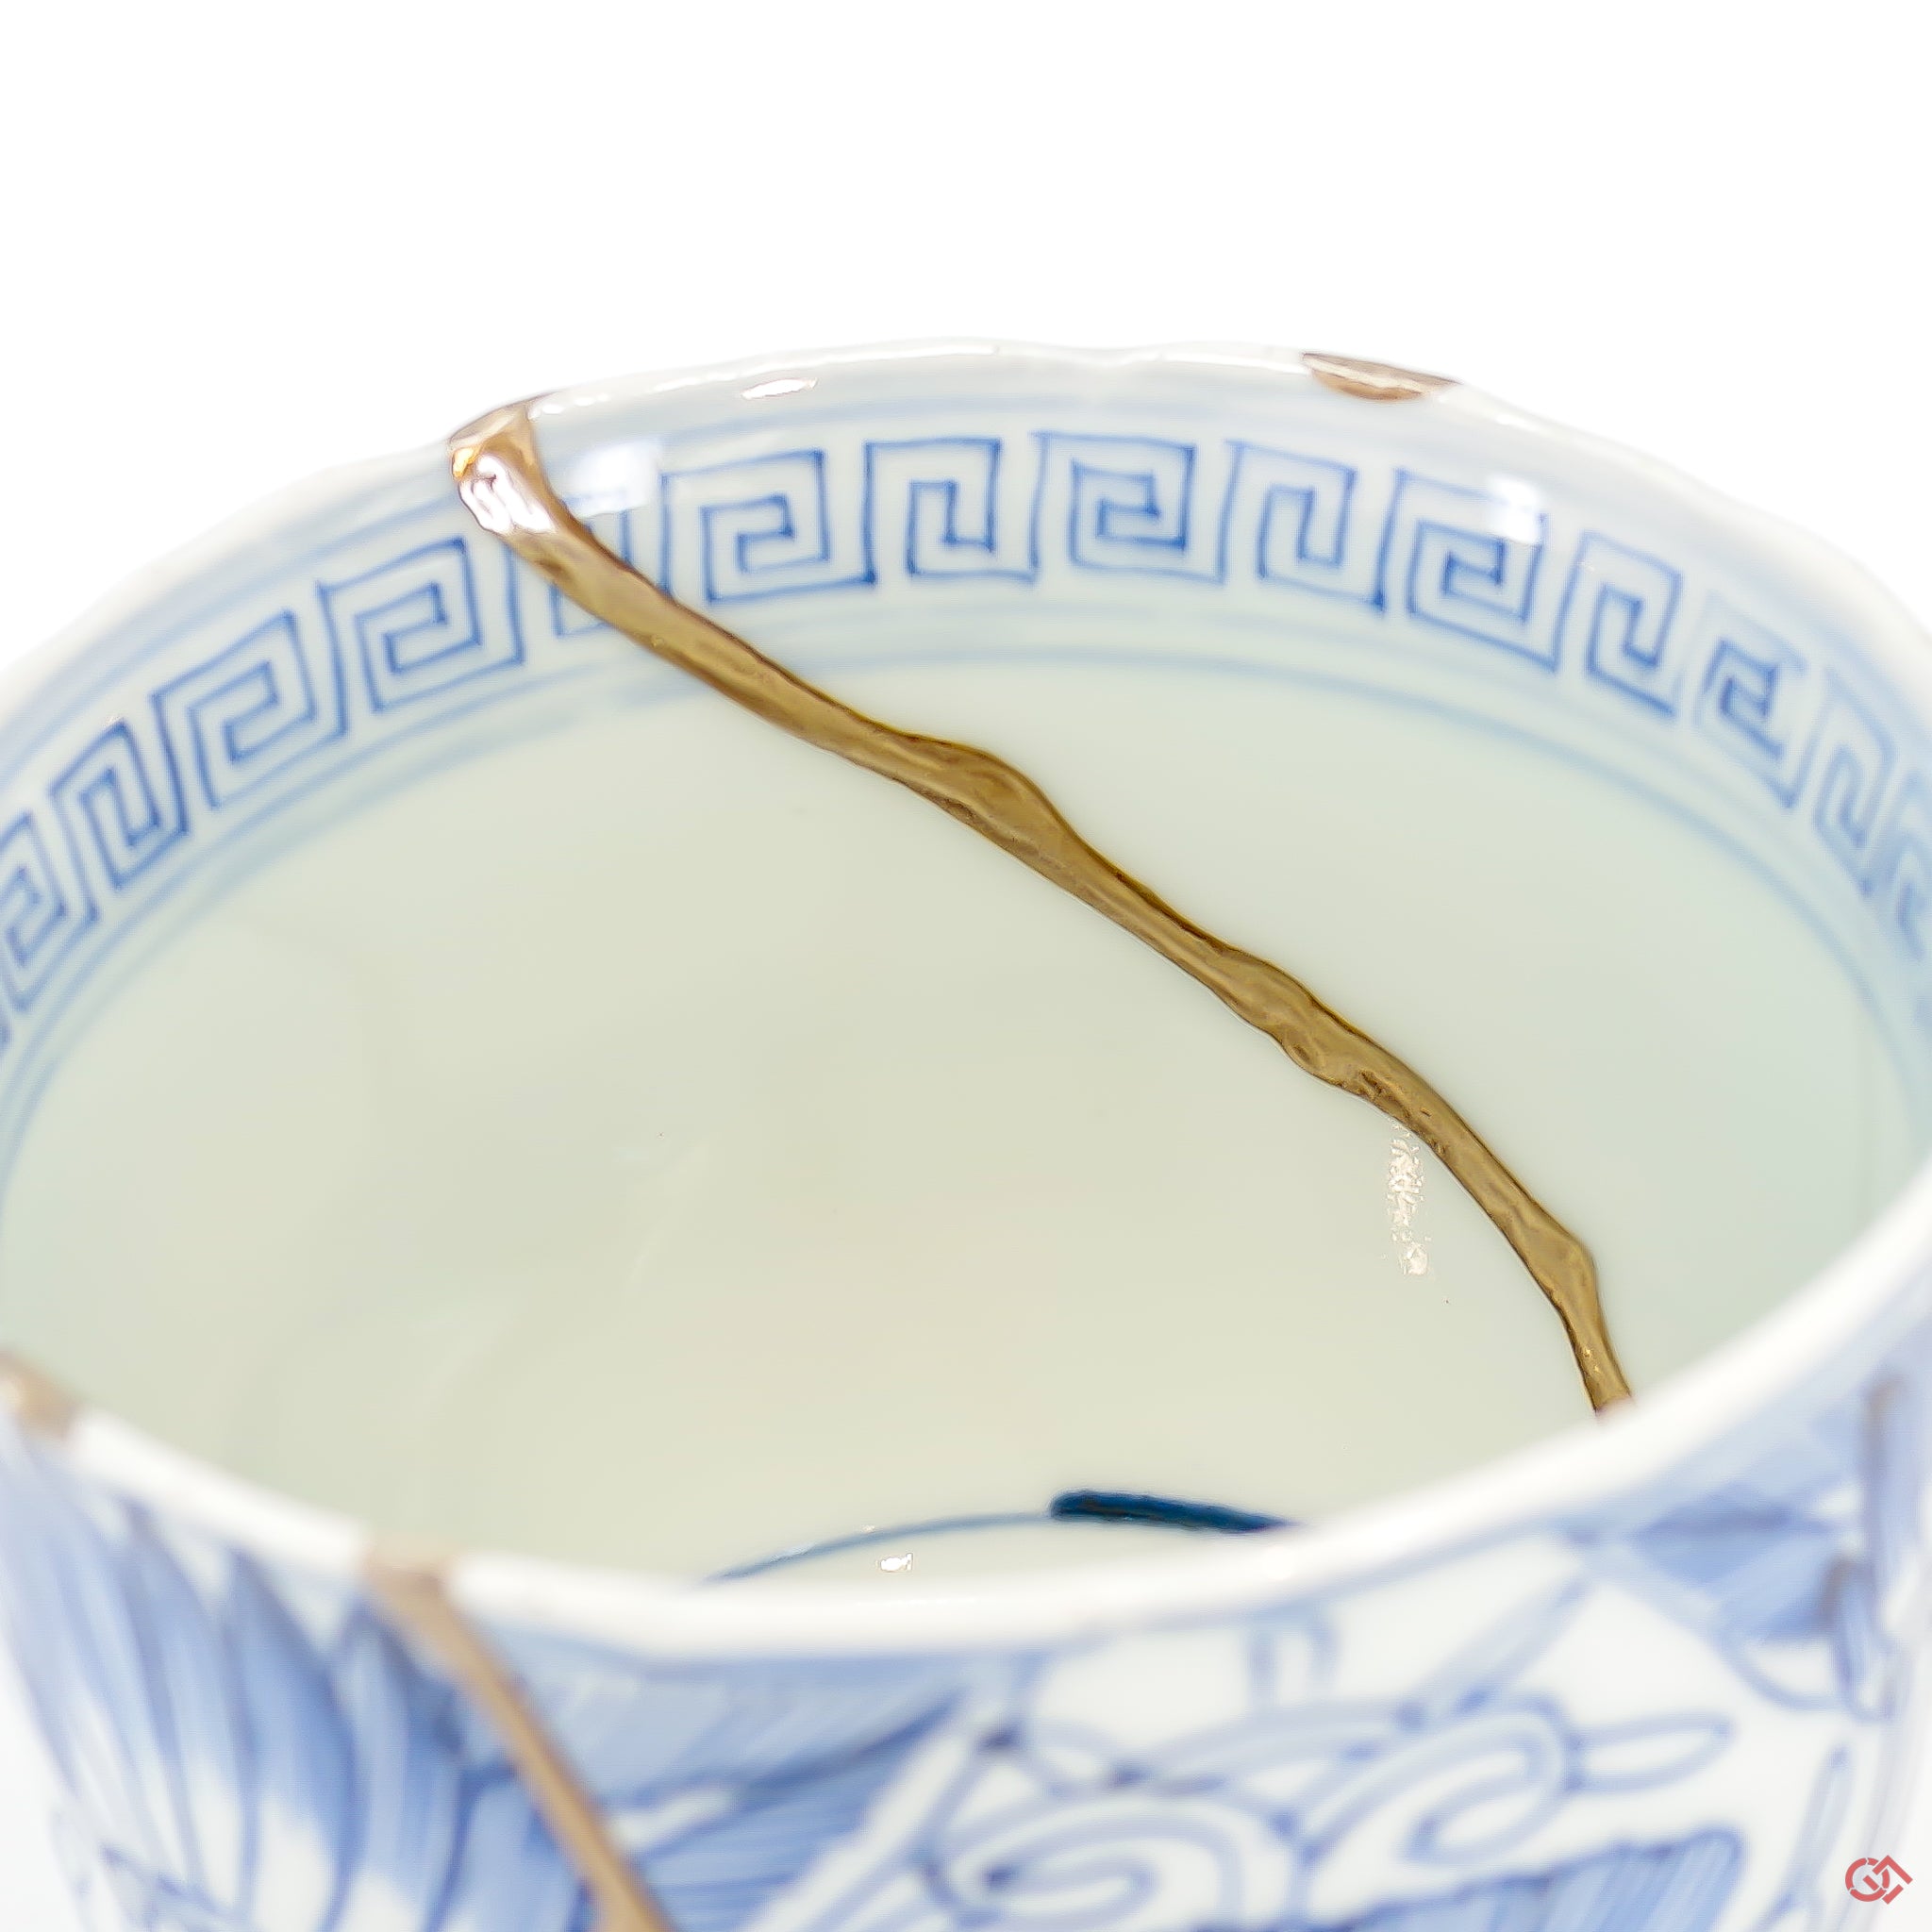 A close-up photo of an authentic Kintsugi pottery piece, showing the detail of its repairs and craftsmanship.